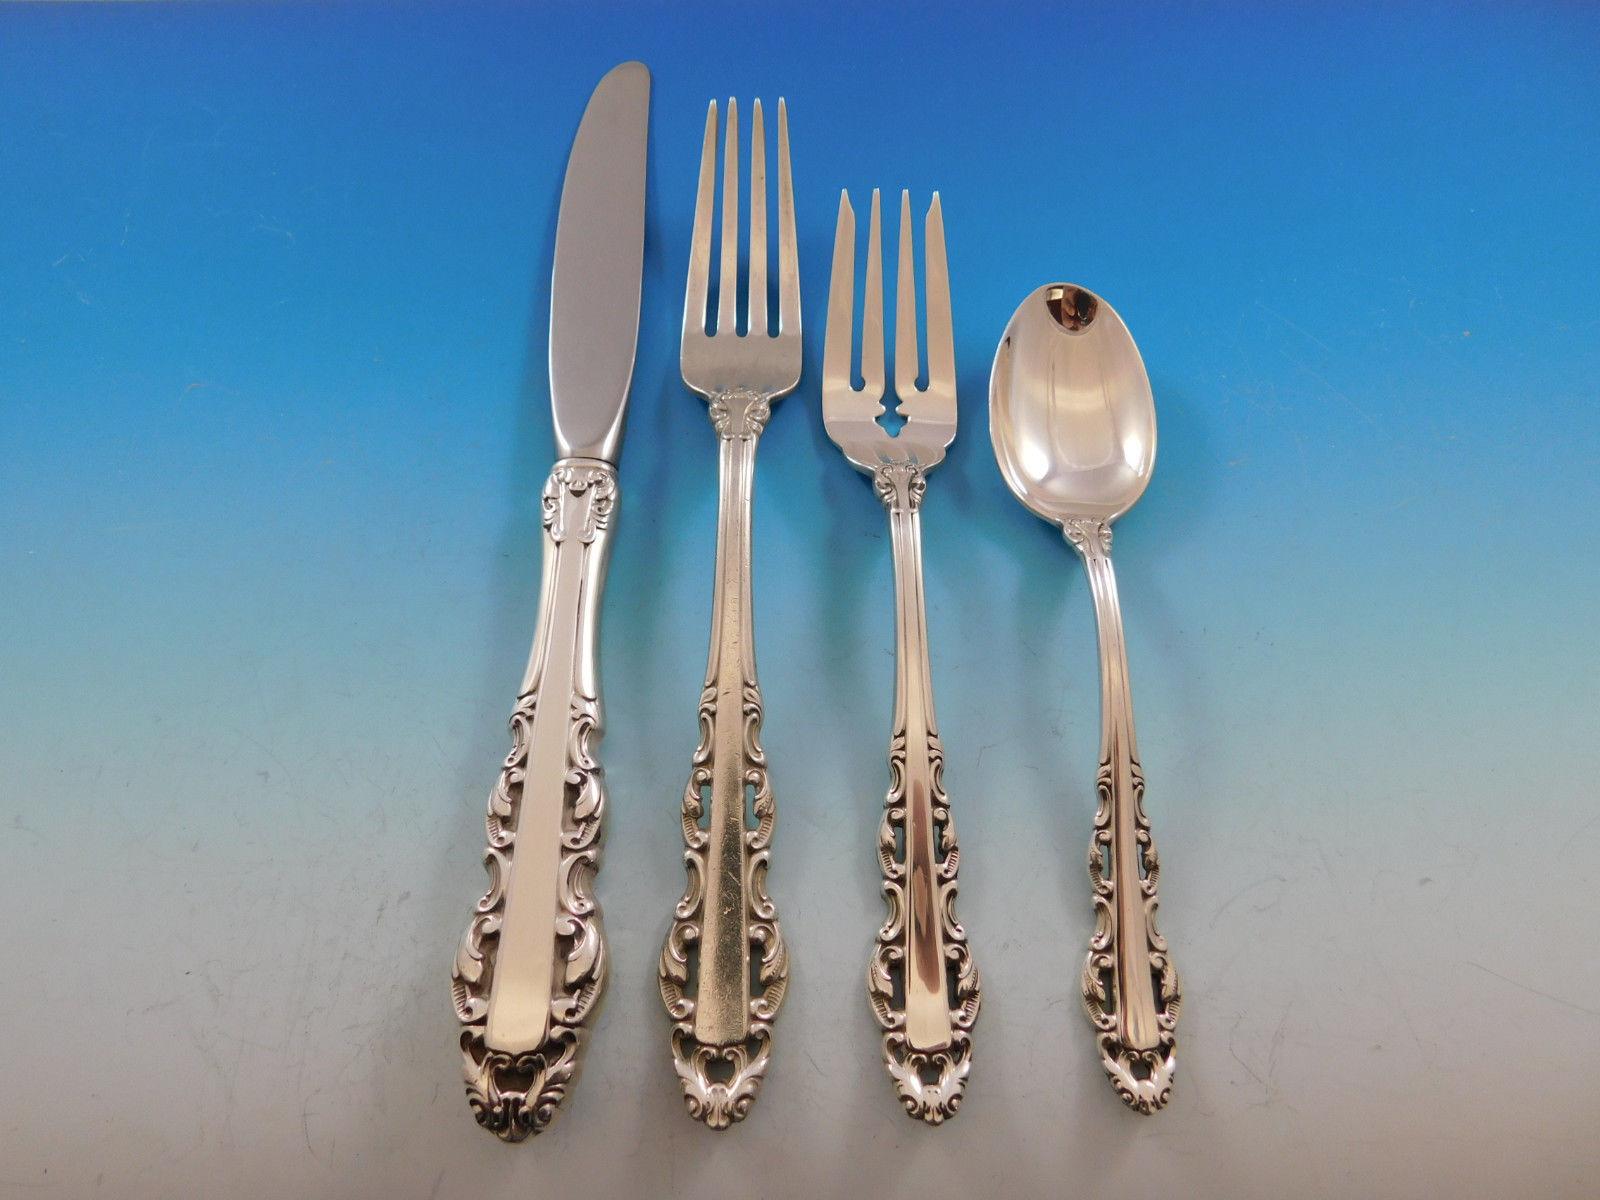 Albemarle by Alvin sterling silver flatware set of 30 pieces. Great starter set! This set includes

Six knives, 9 1/8